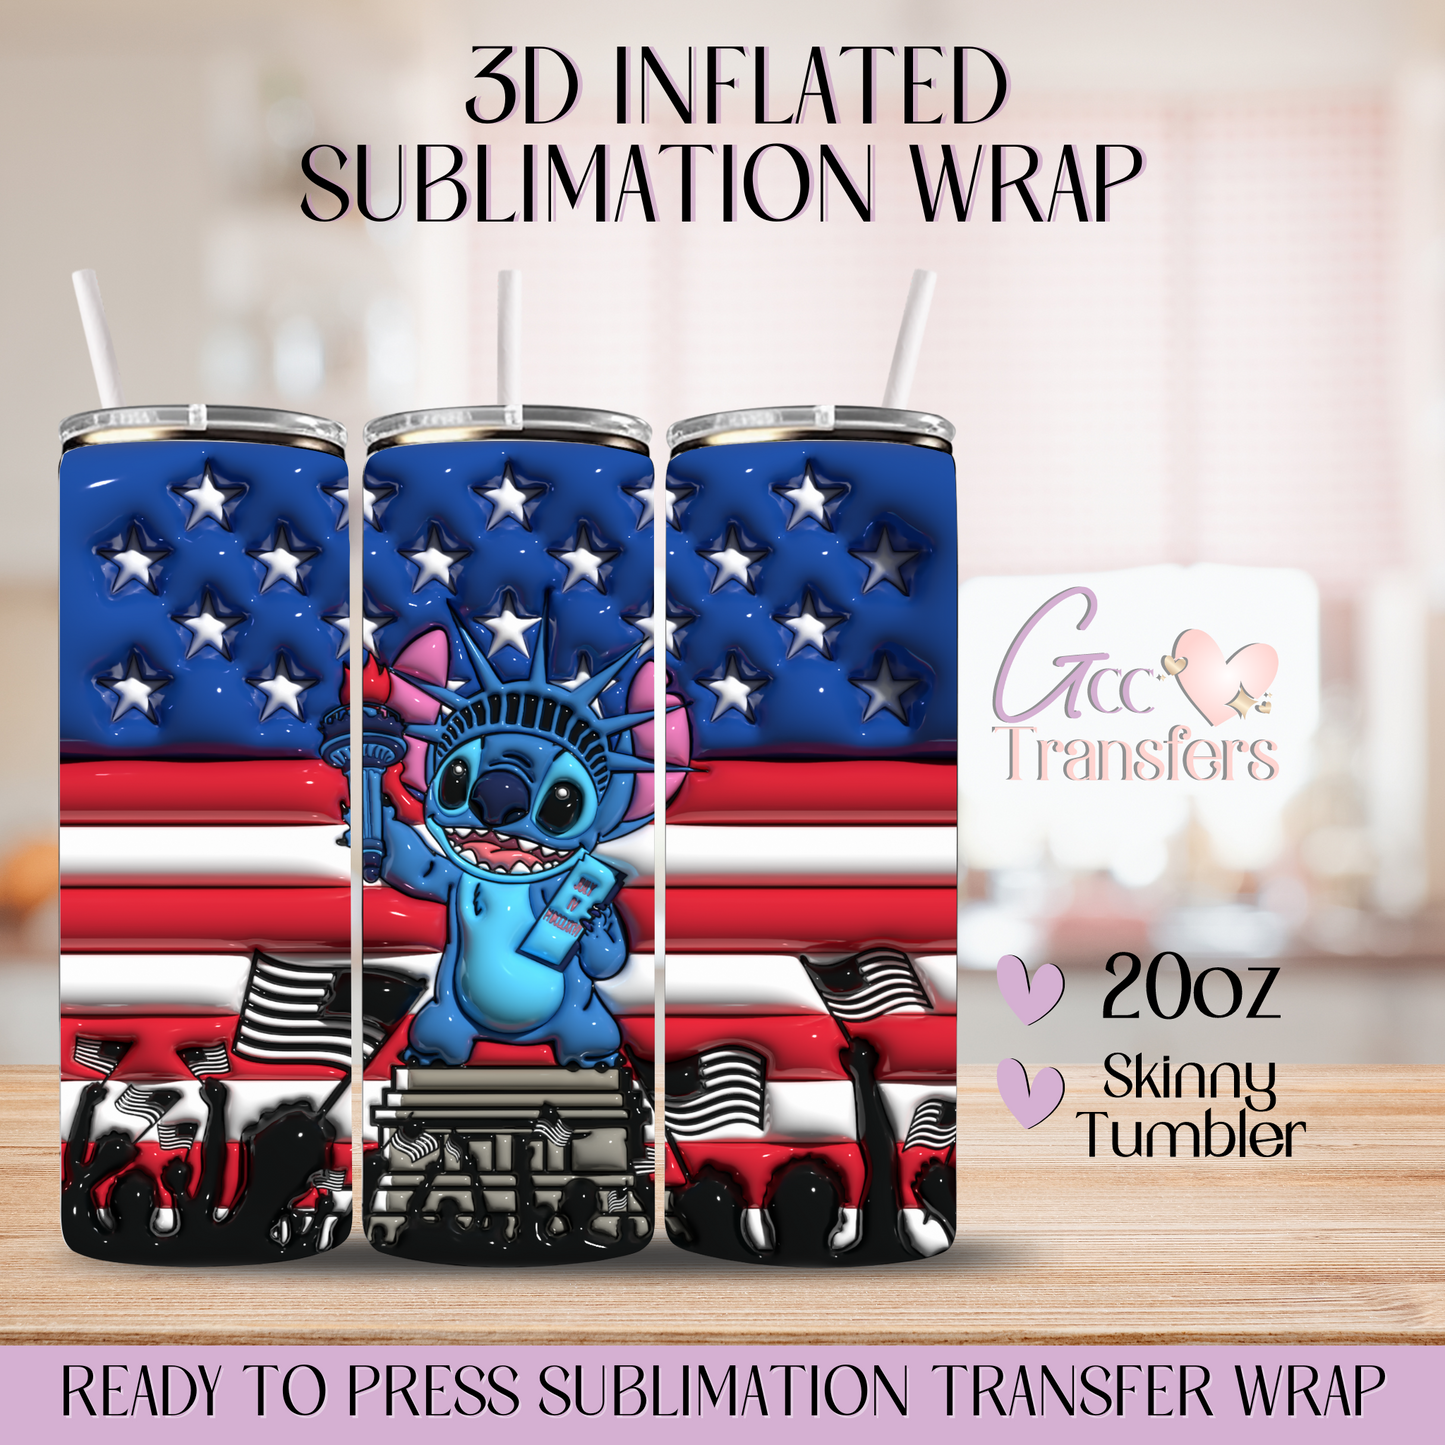 4th of July Liberty Cute Cartoon - 20oz 3D Inflated Sublimation Wrap